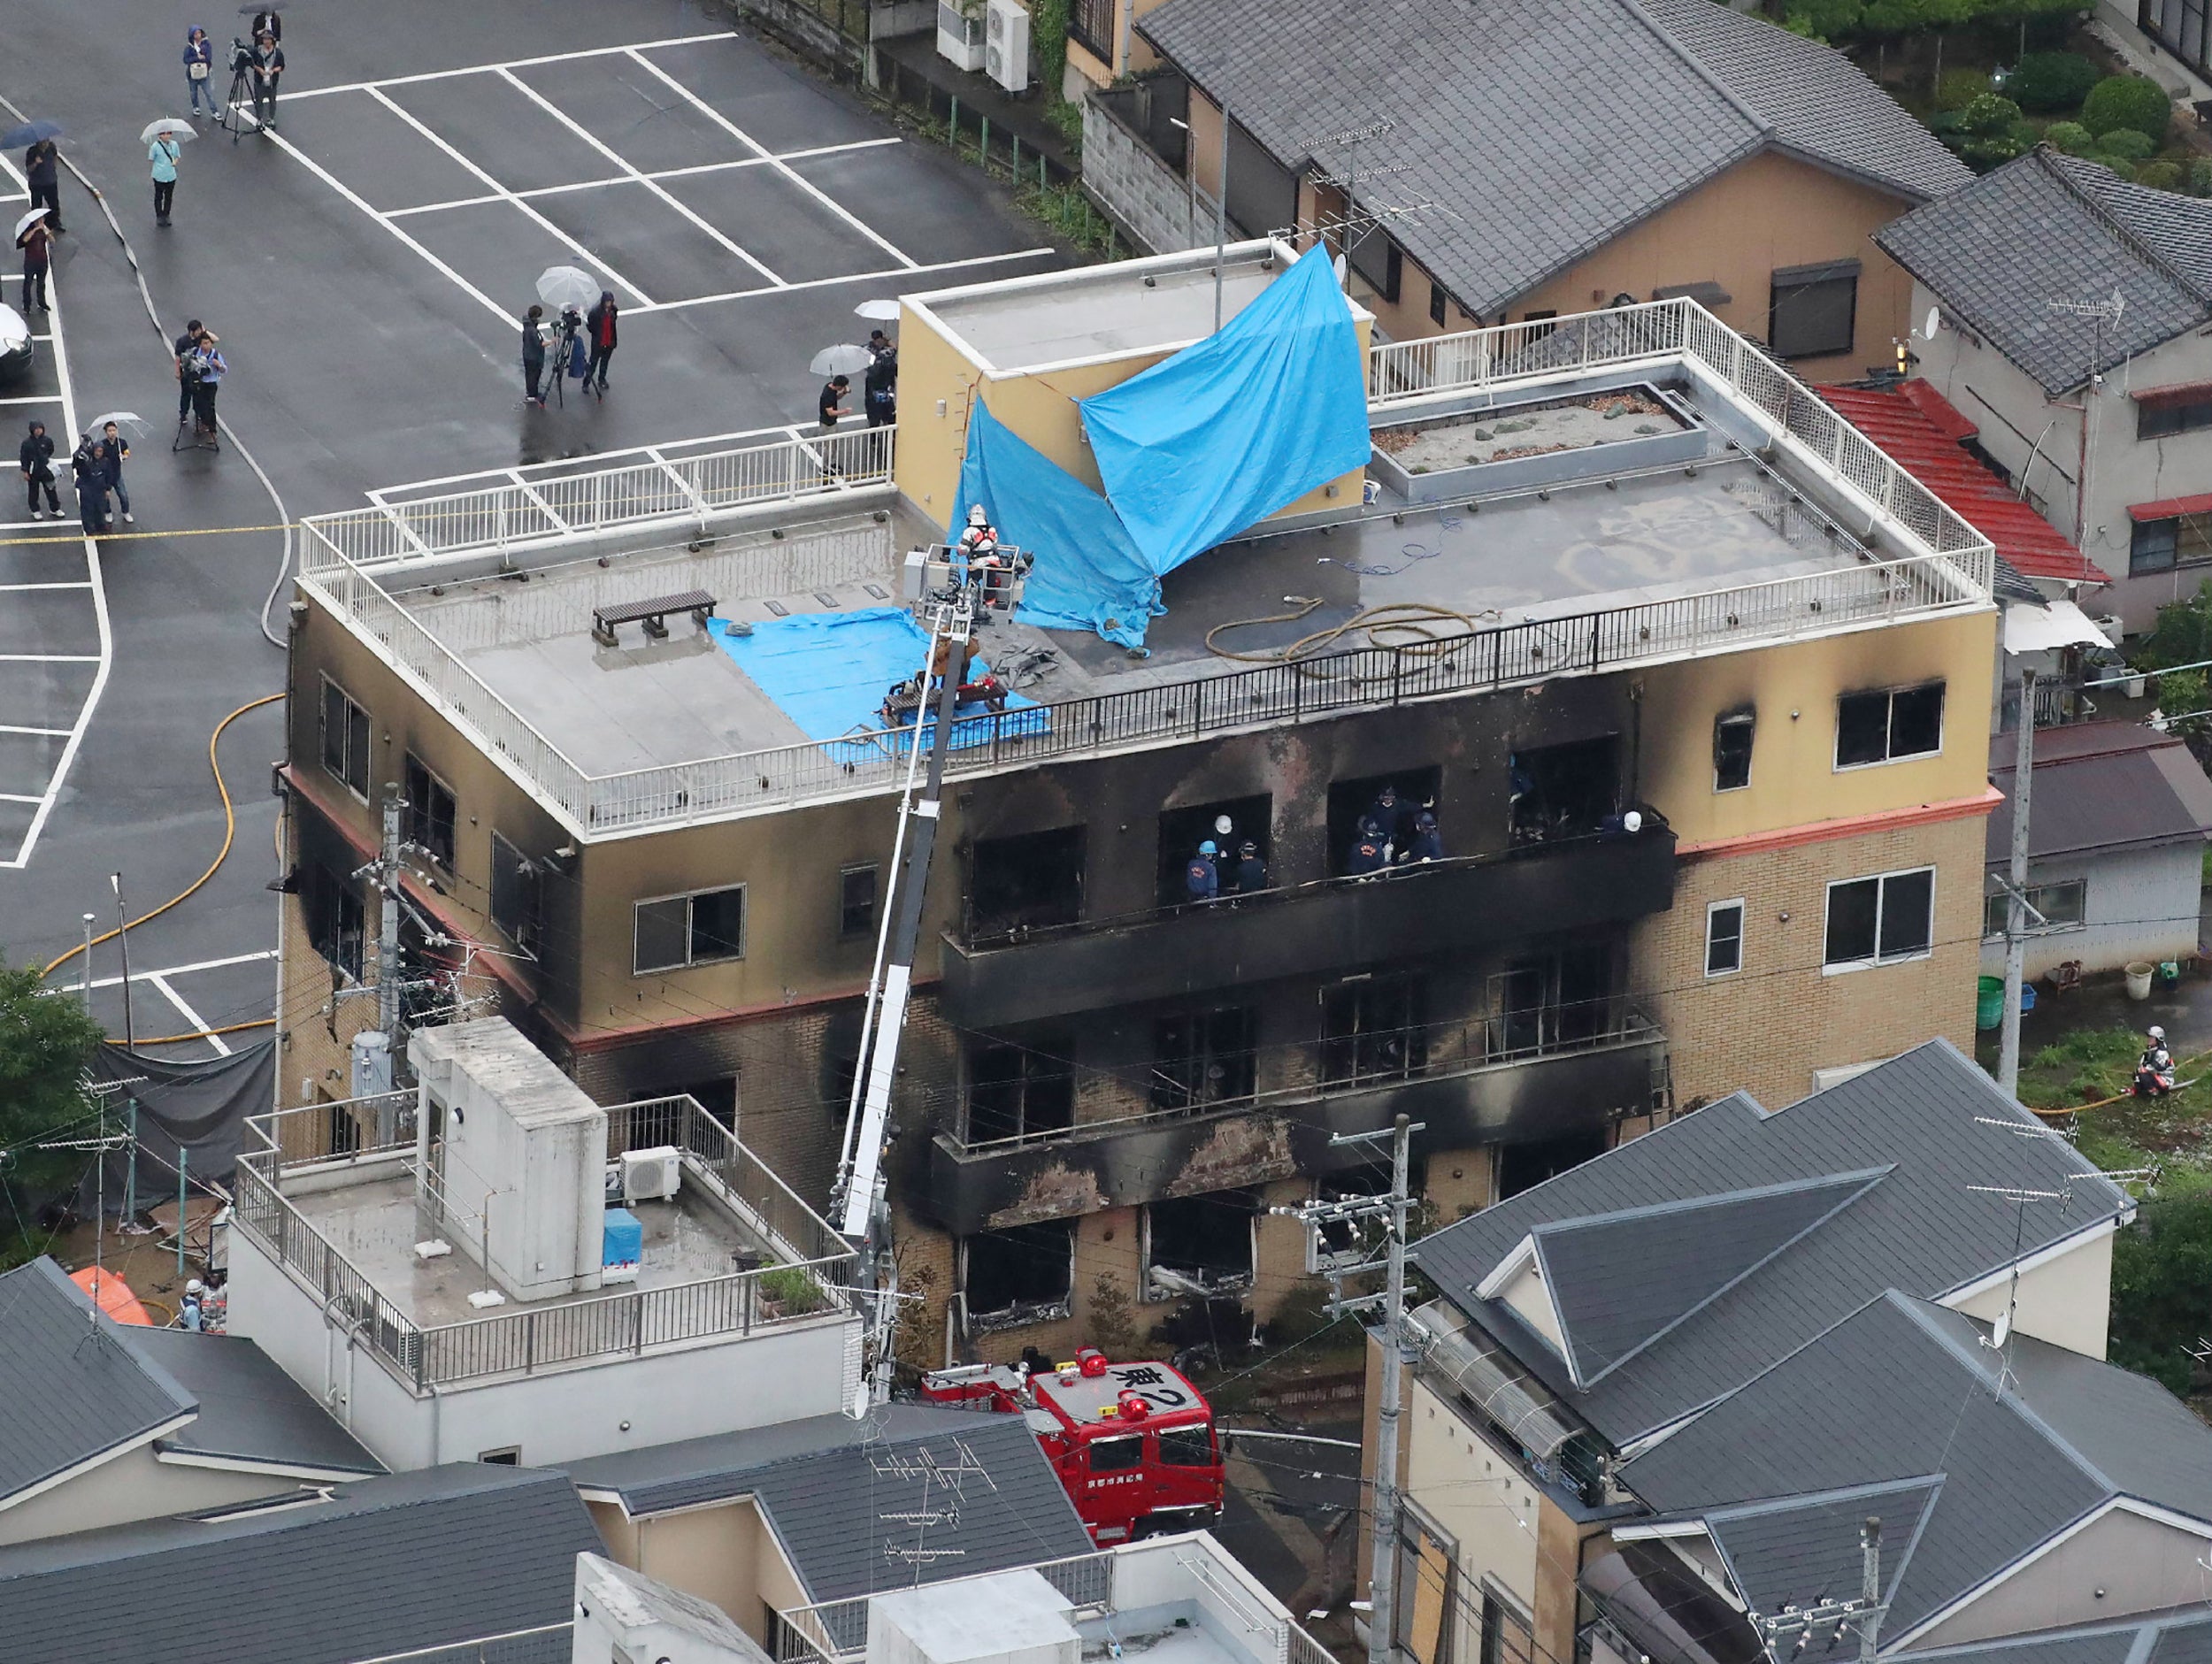 Shinji Aoba started a fire in 2019 which killed 36 people in the Kyoto Animation Studio